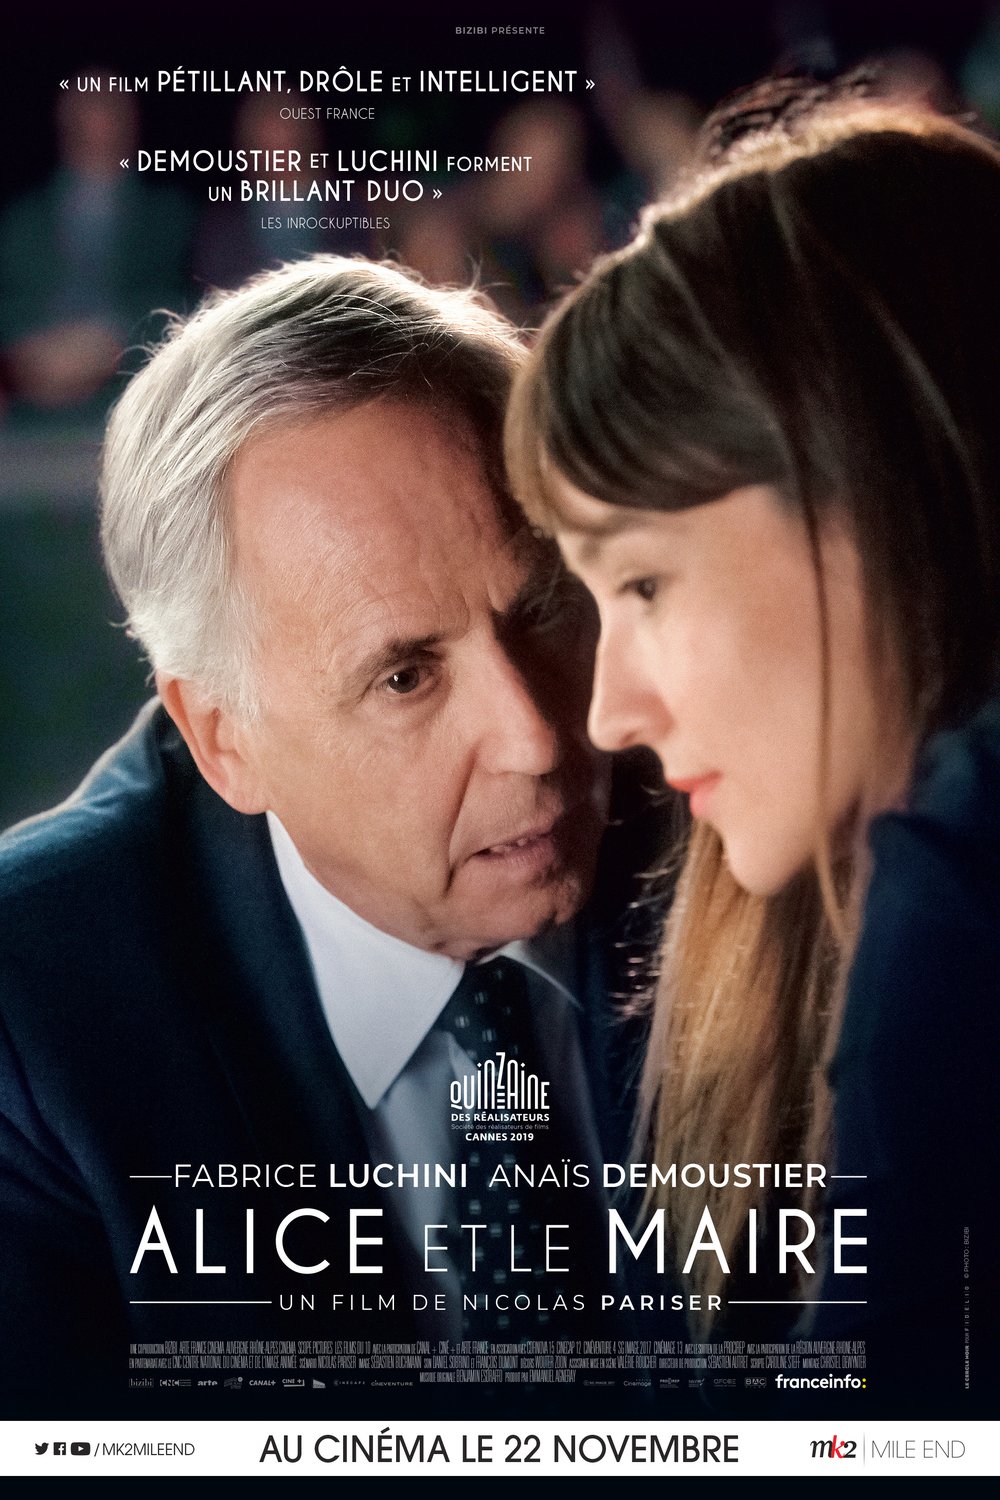 Poster of the movie Alice and the Mayor